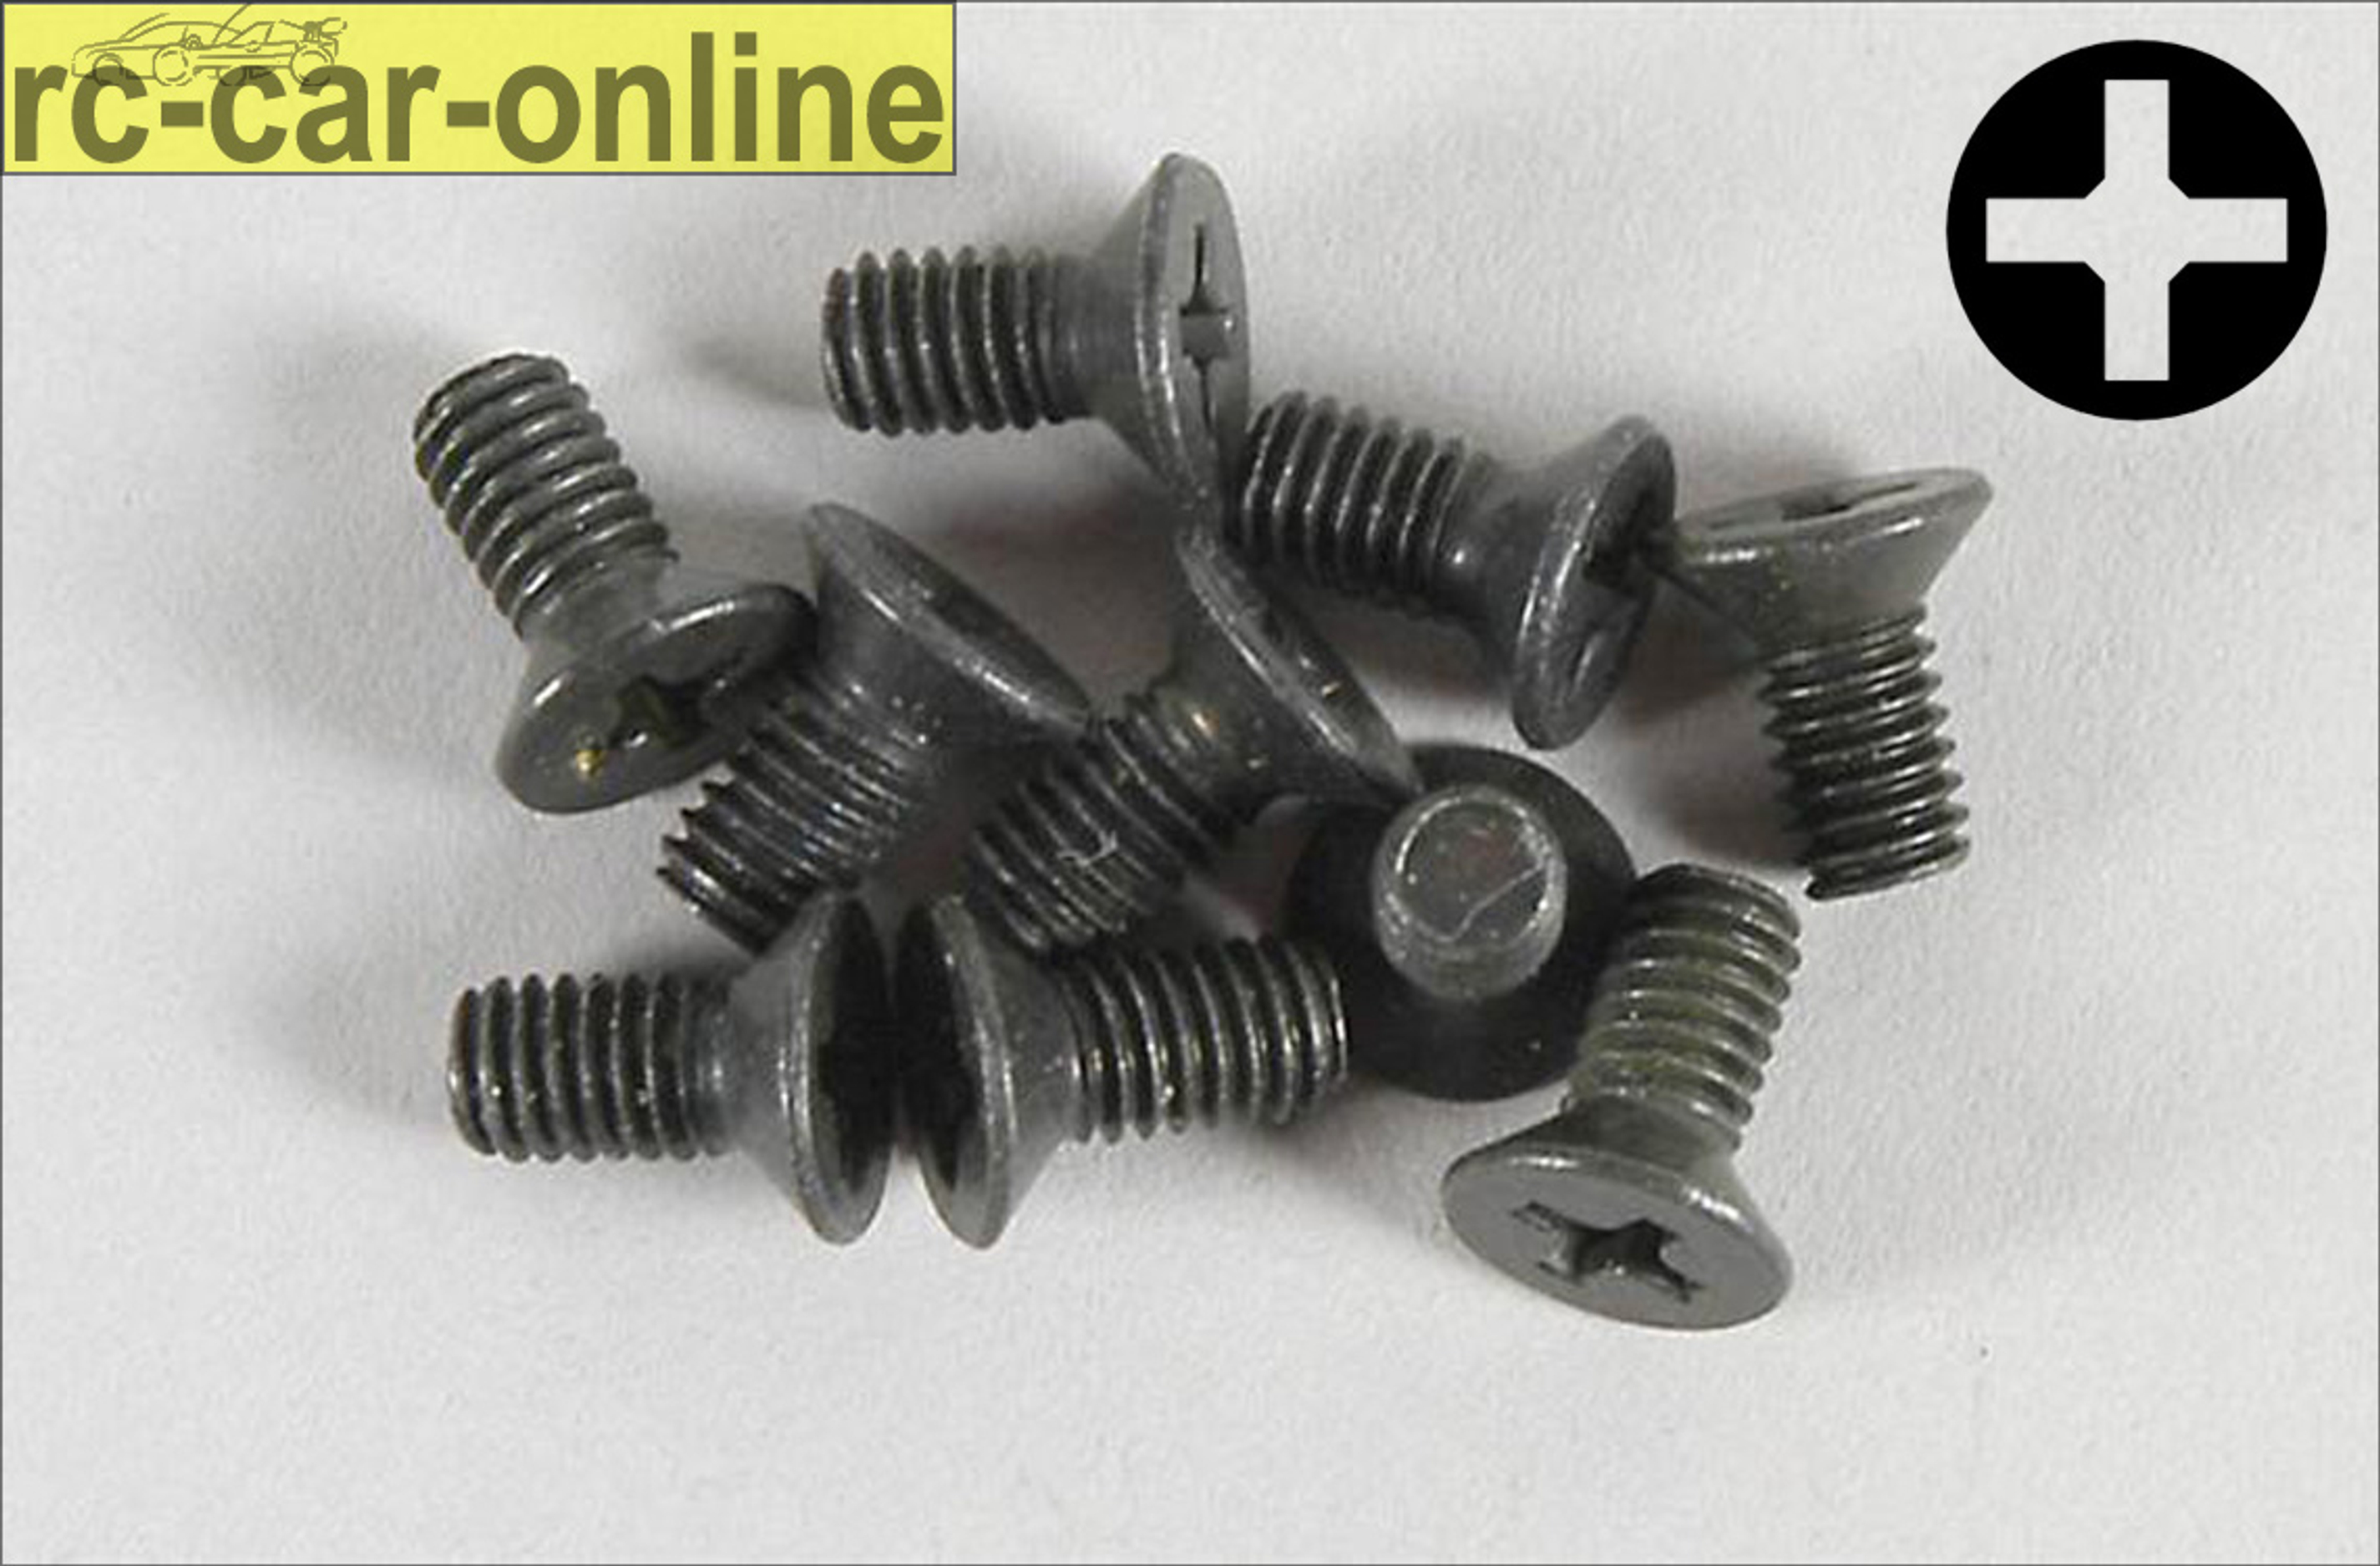 6718/06 FG Countersunk screw with cross recess M4x6 mm, 10 pieces